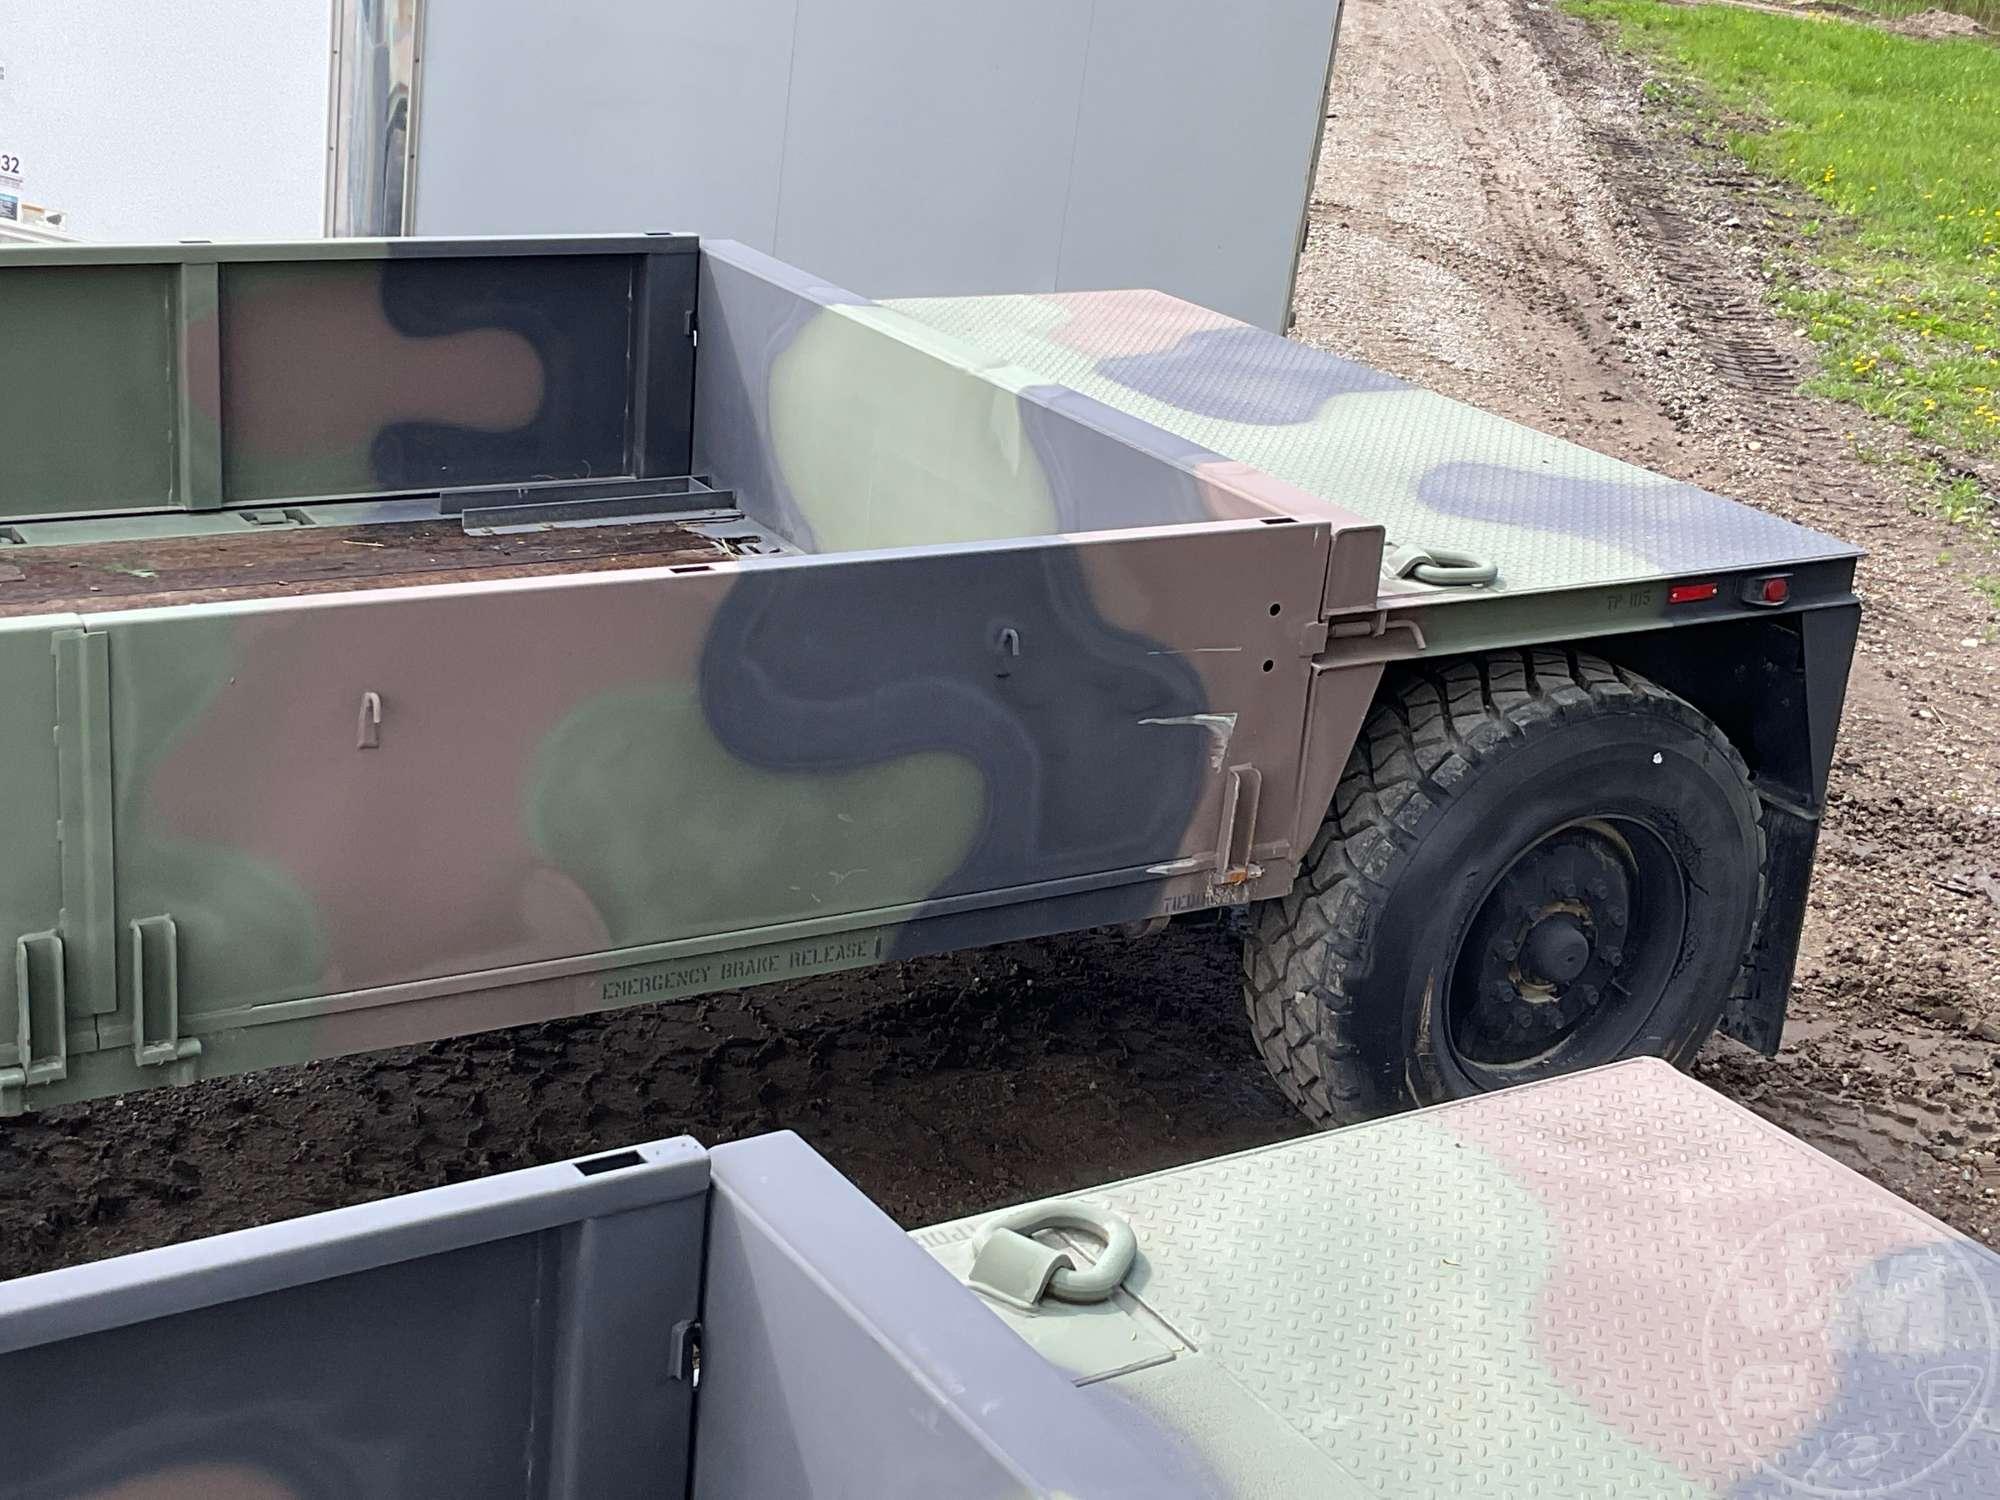 2010 DRS SUSTAINMENT SYSTEMS M989A1 VIN: NW2FE2 4163 T/A HEAVY EXPANDED MOBILITY AMMUNITION TRAILER